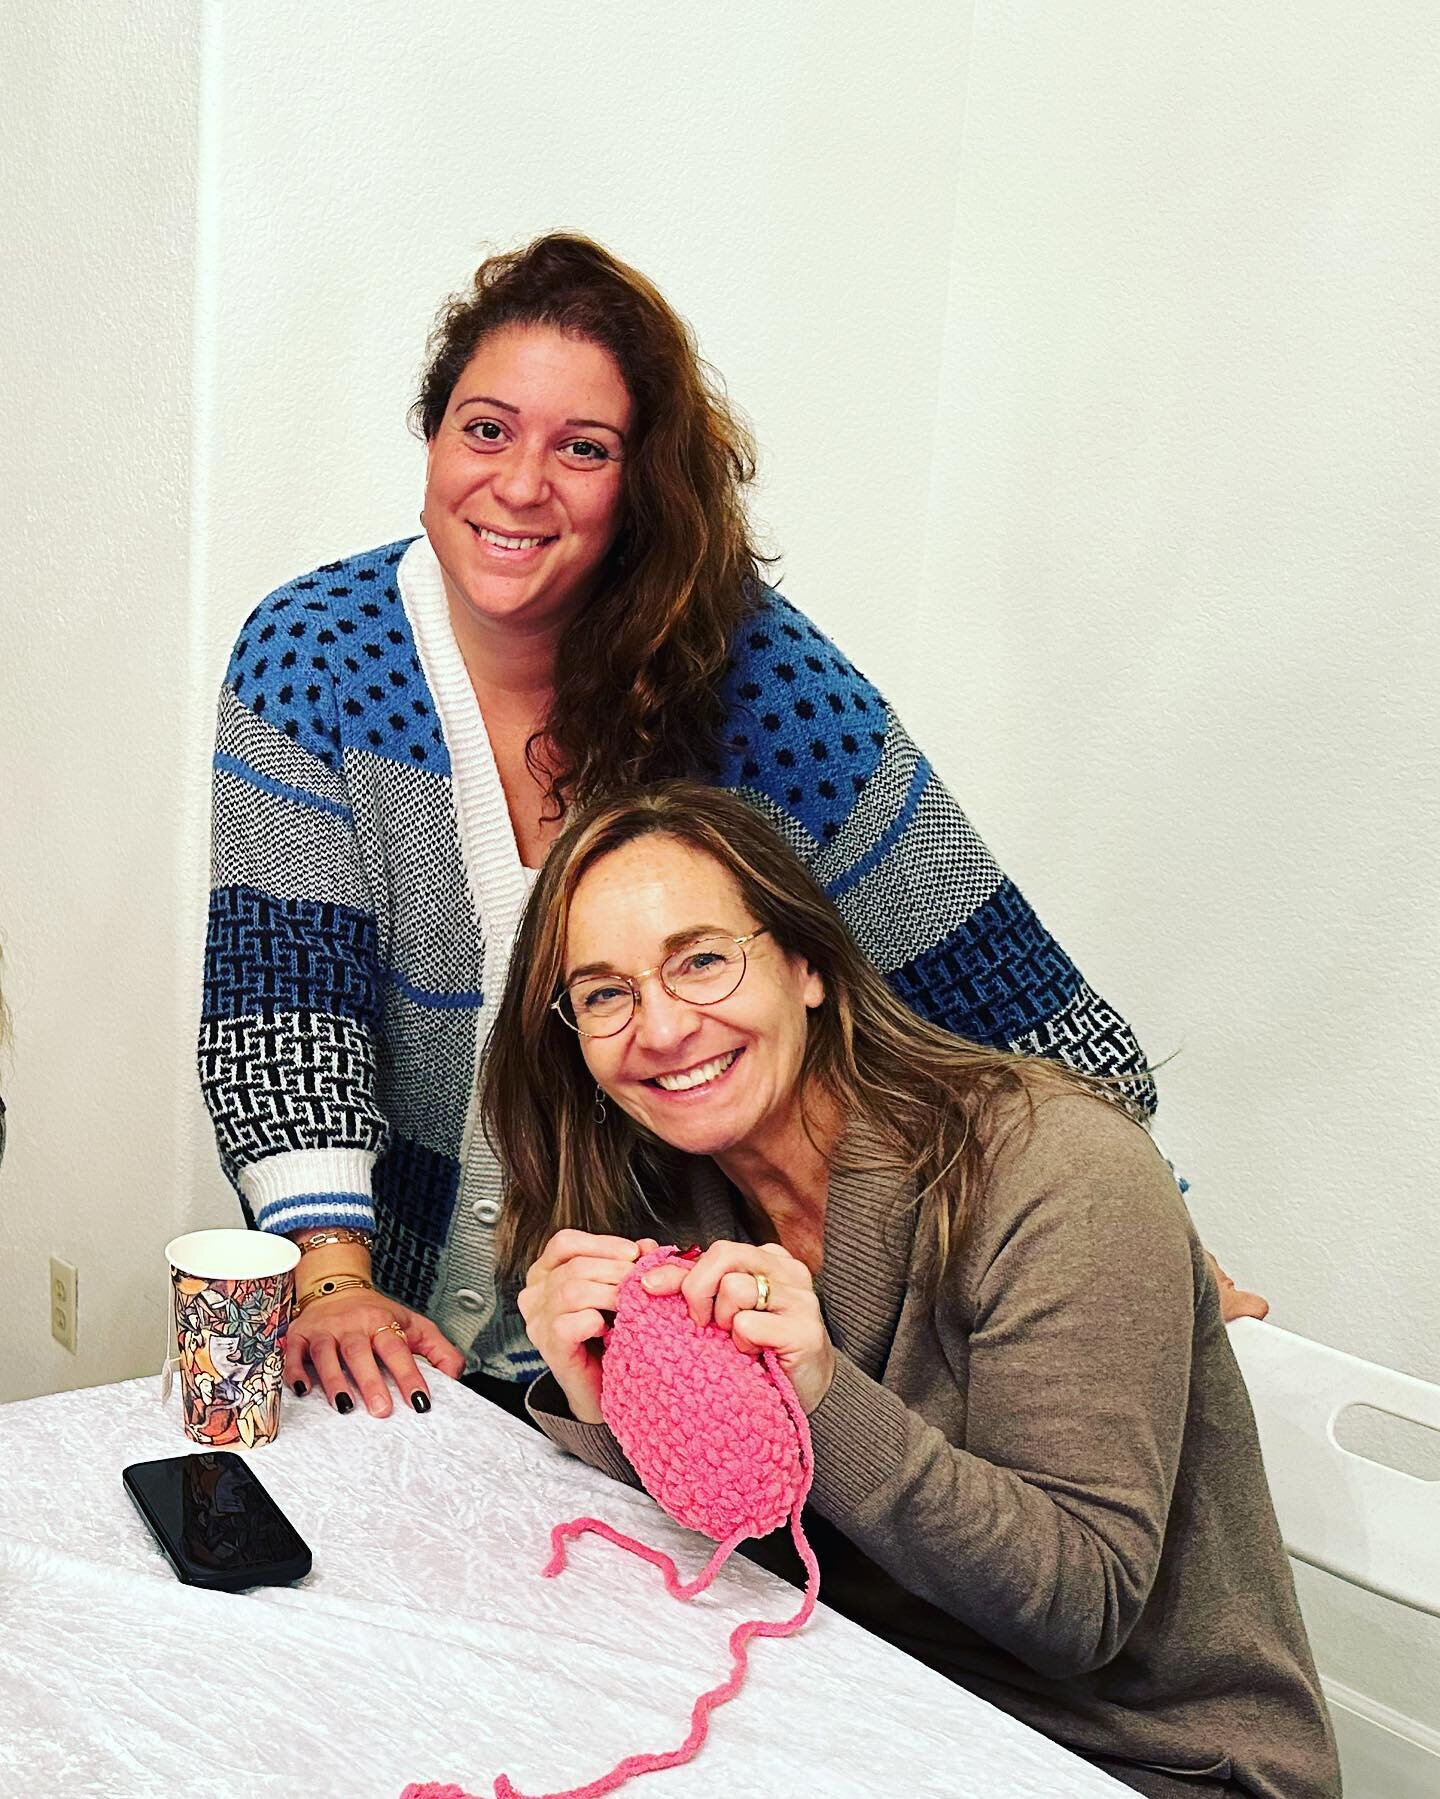 Just some Jewish girls who Crochet! What a fabulous night, thank you Sandy @linoyboutique for showing us your expertise.